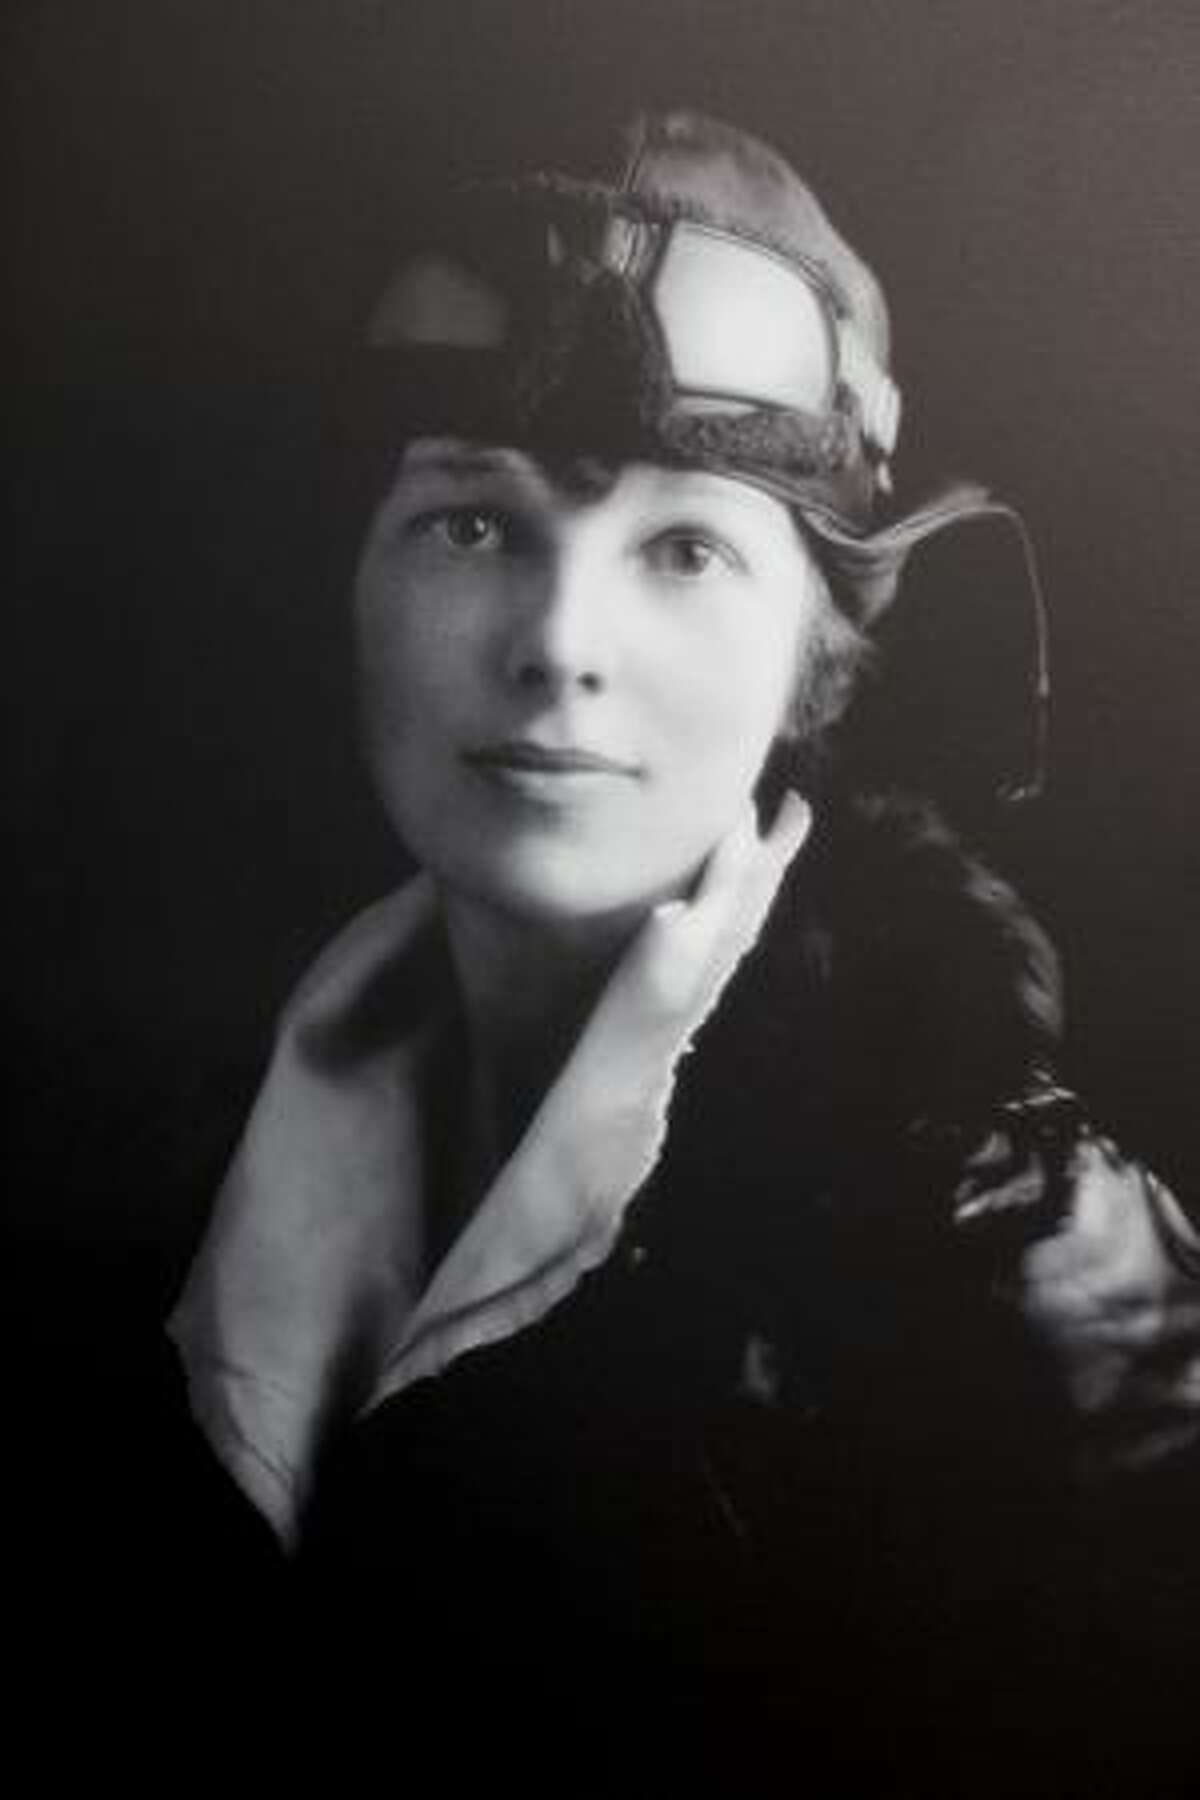 Amelia Earhart's photo taken for her pilot's license at the new Amelia Earhart exhibit at The Museum of Flight. The exhibit opens on Saturday October 24, 2009.